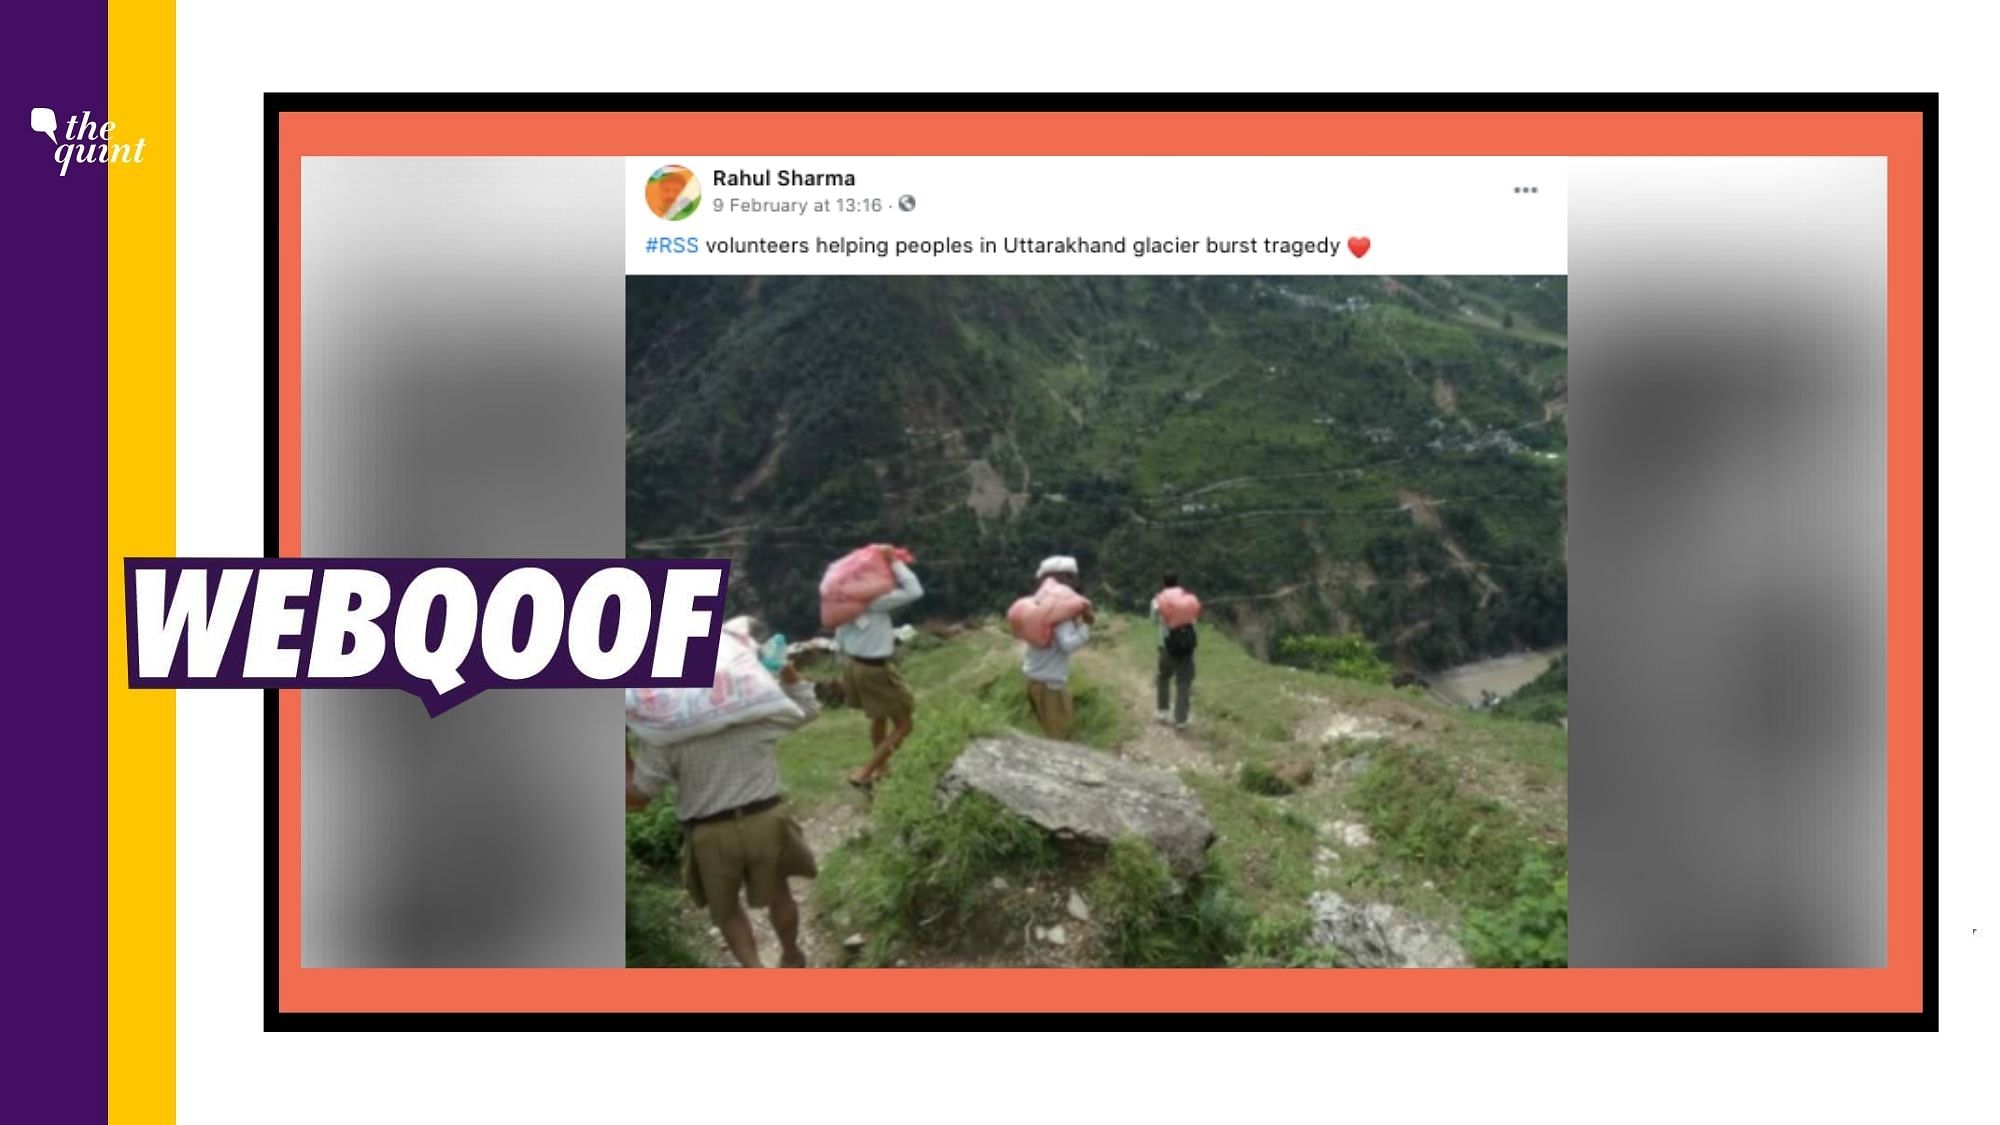 An image of RSS workers providing relief material is being shared on social media with a claim that it is from the recent Uttarakhand flash flood tragedy. 